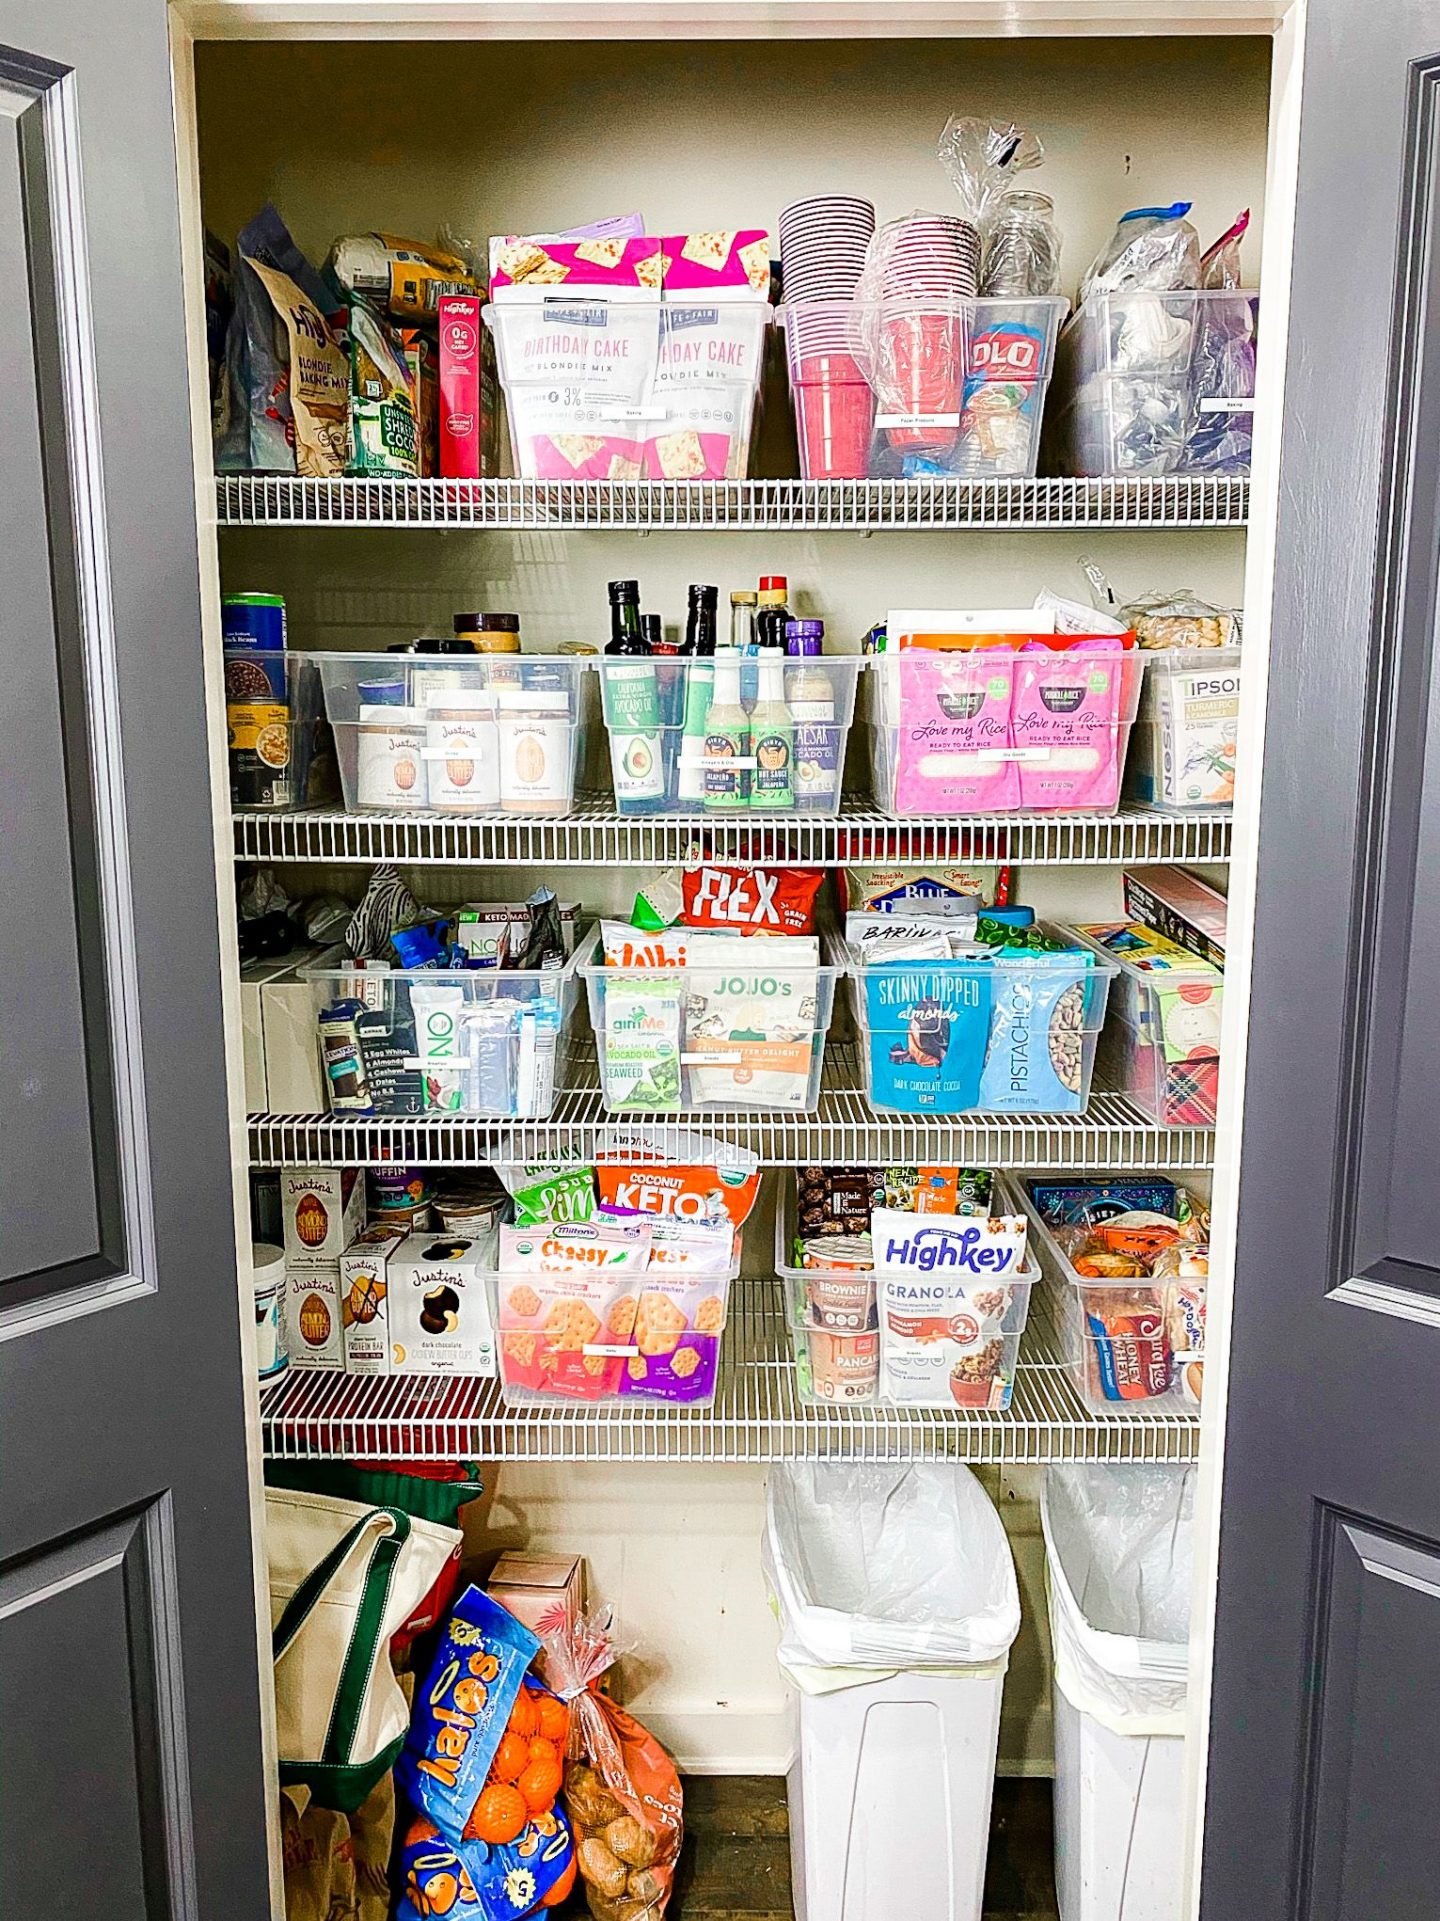 How to Organize Your Pantry - Pantry Organization Tips